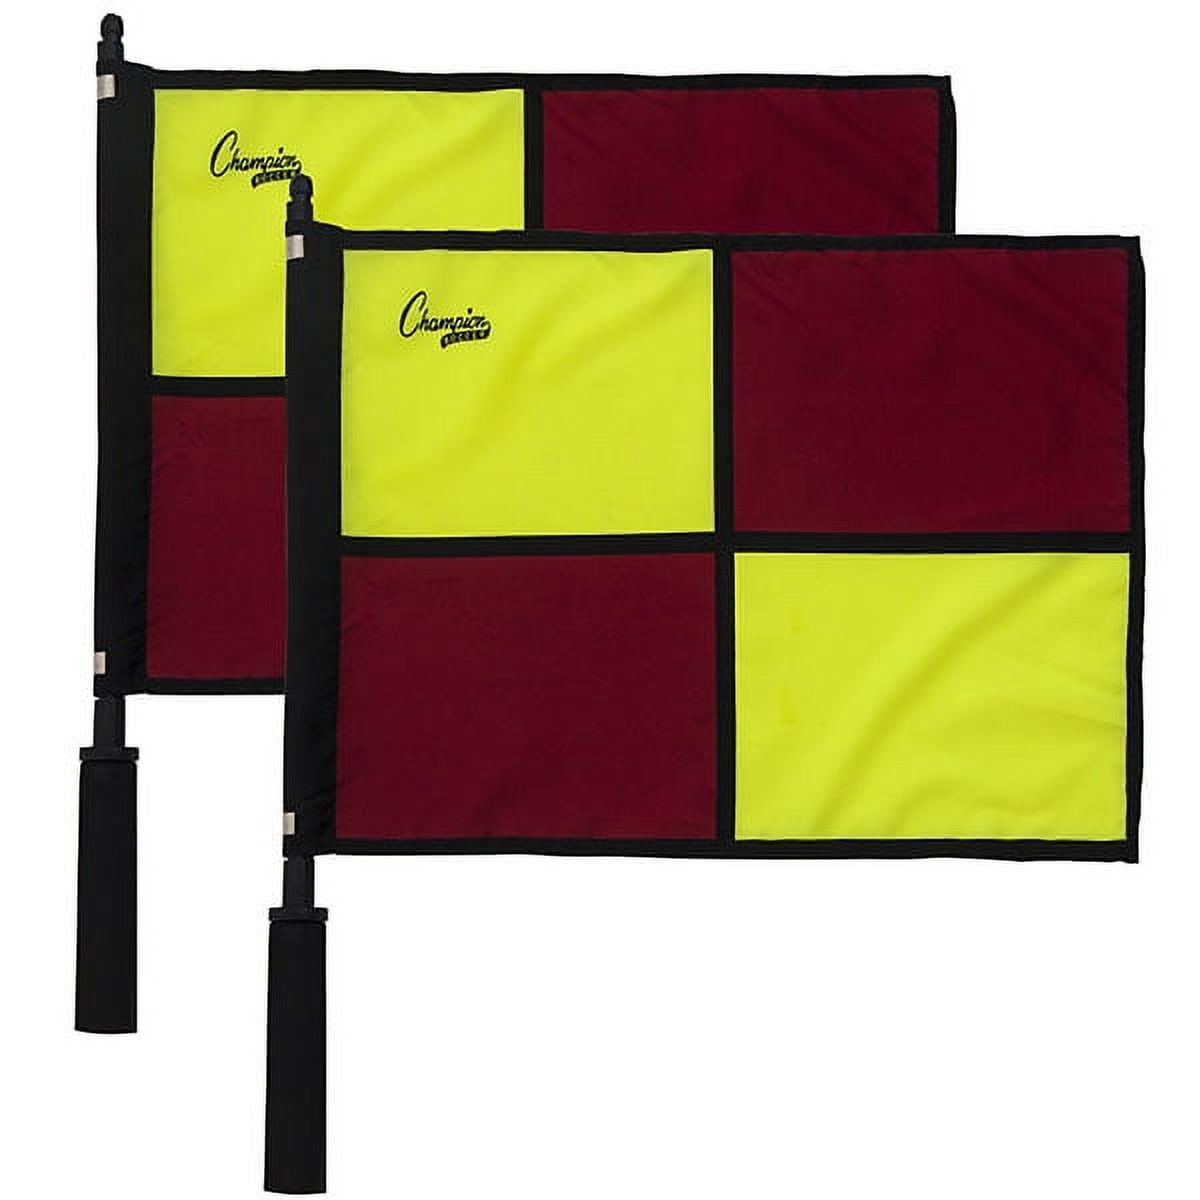 Picture of Champion Sports LFPRO Official Checkered Flag with Border, Red & Yellow